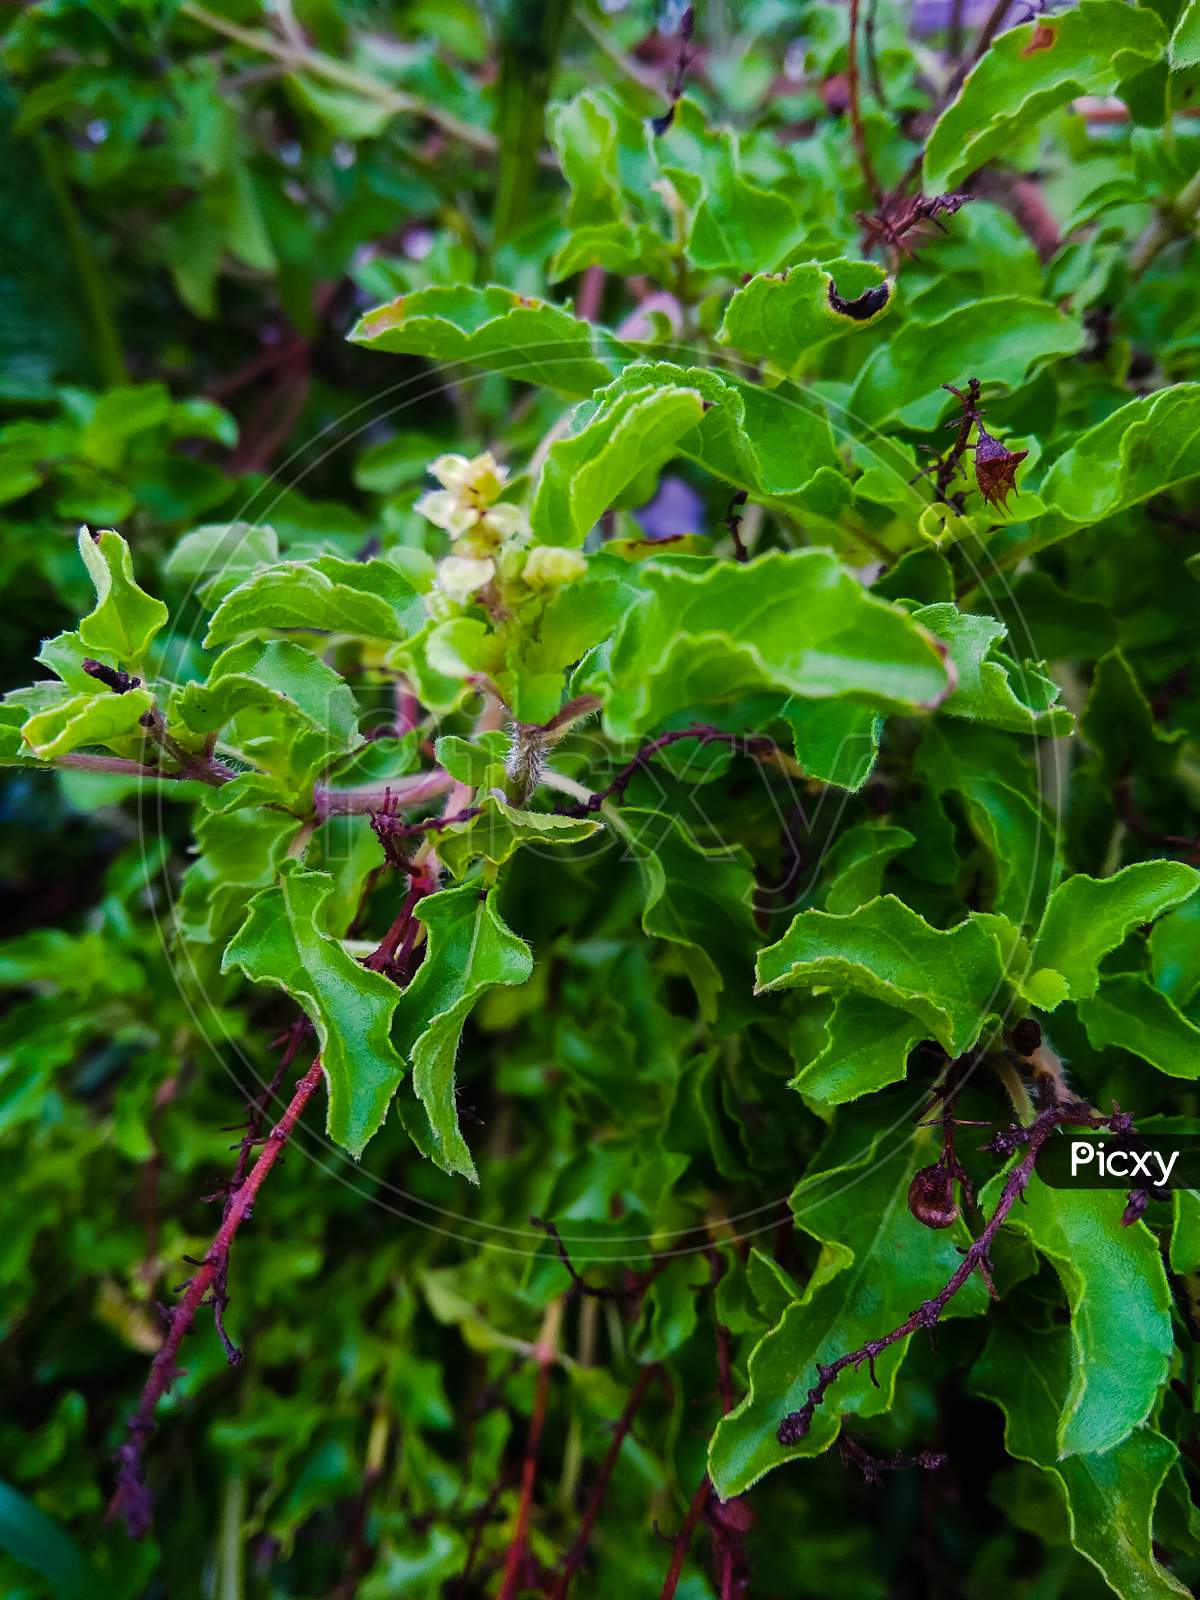 Tulsi also known as holy basil is a medicinal herb used in Ayurveda